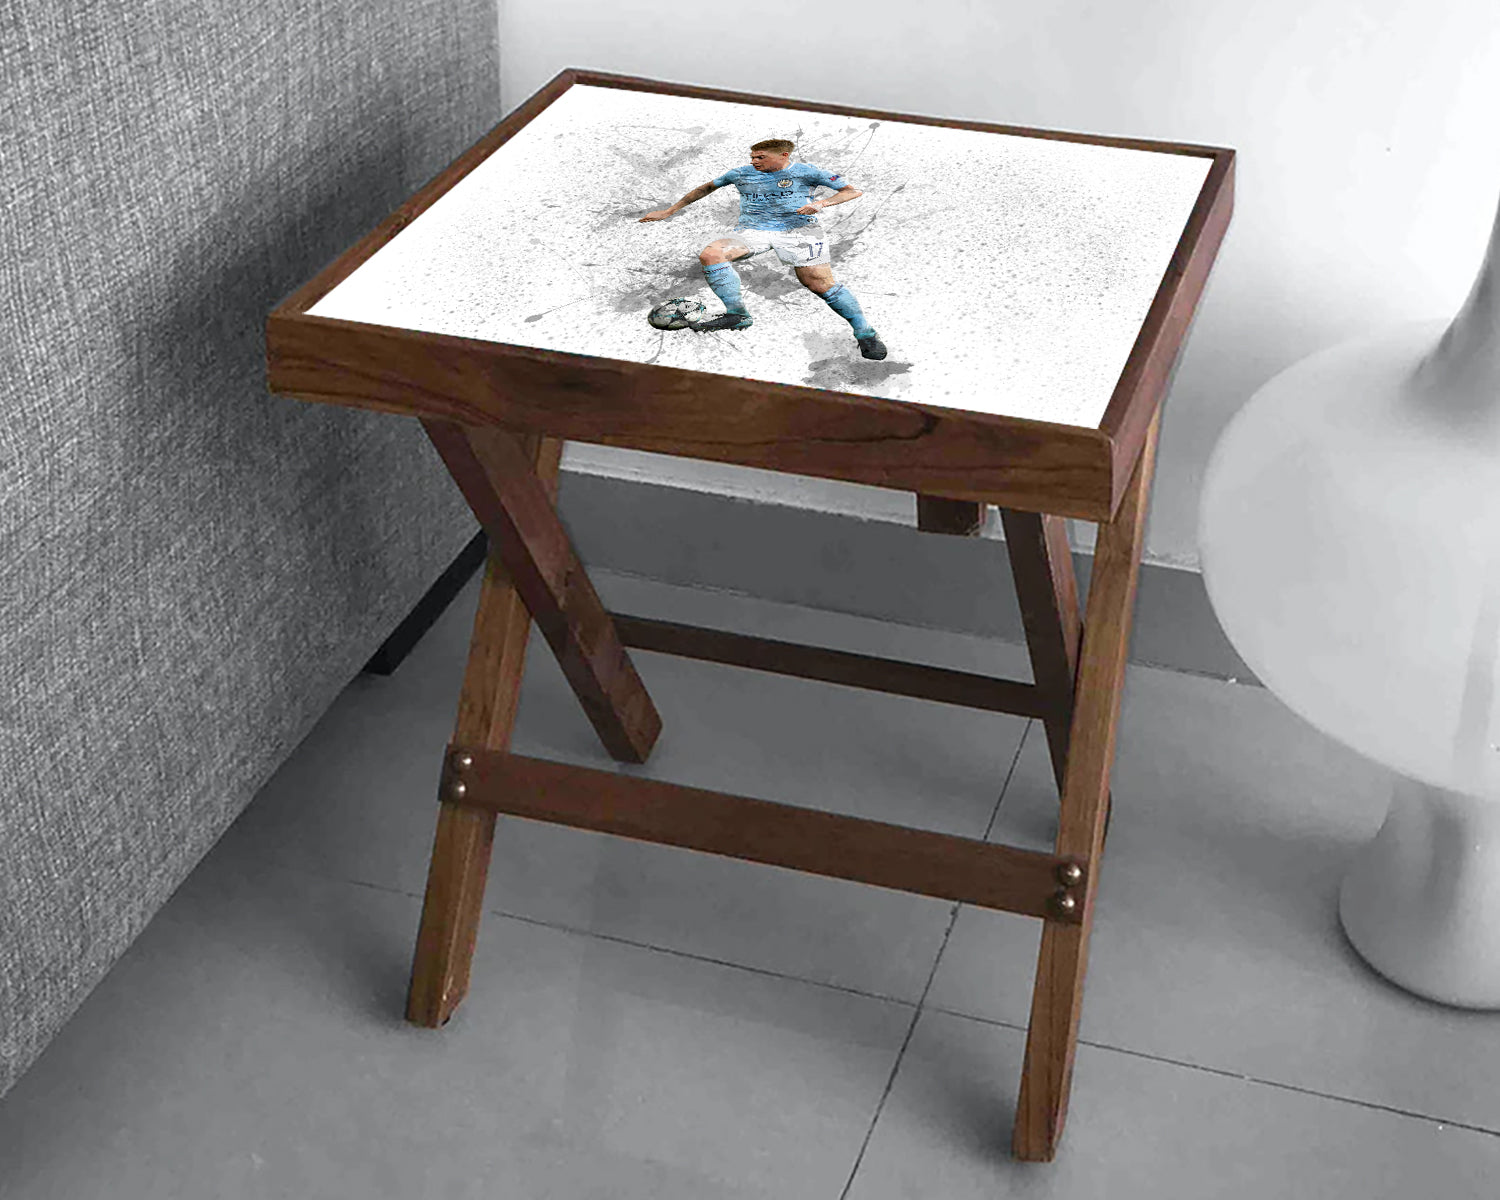 Kevin De Bruyne Splash Effect Coffee and Laptop Table 